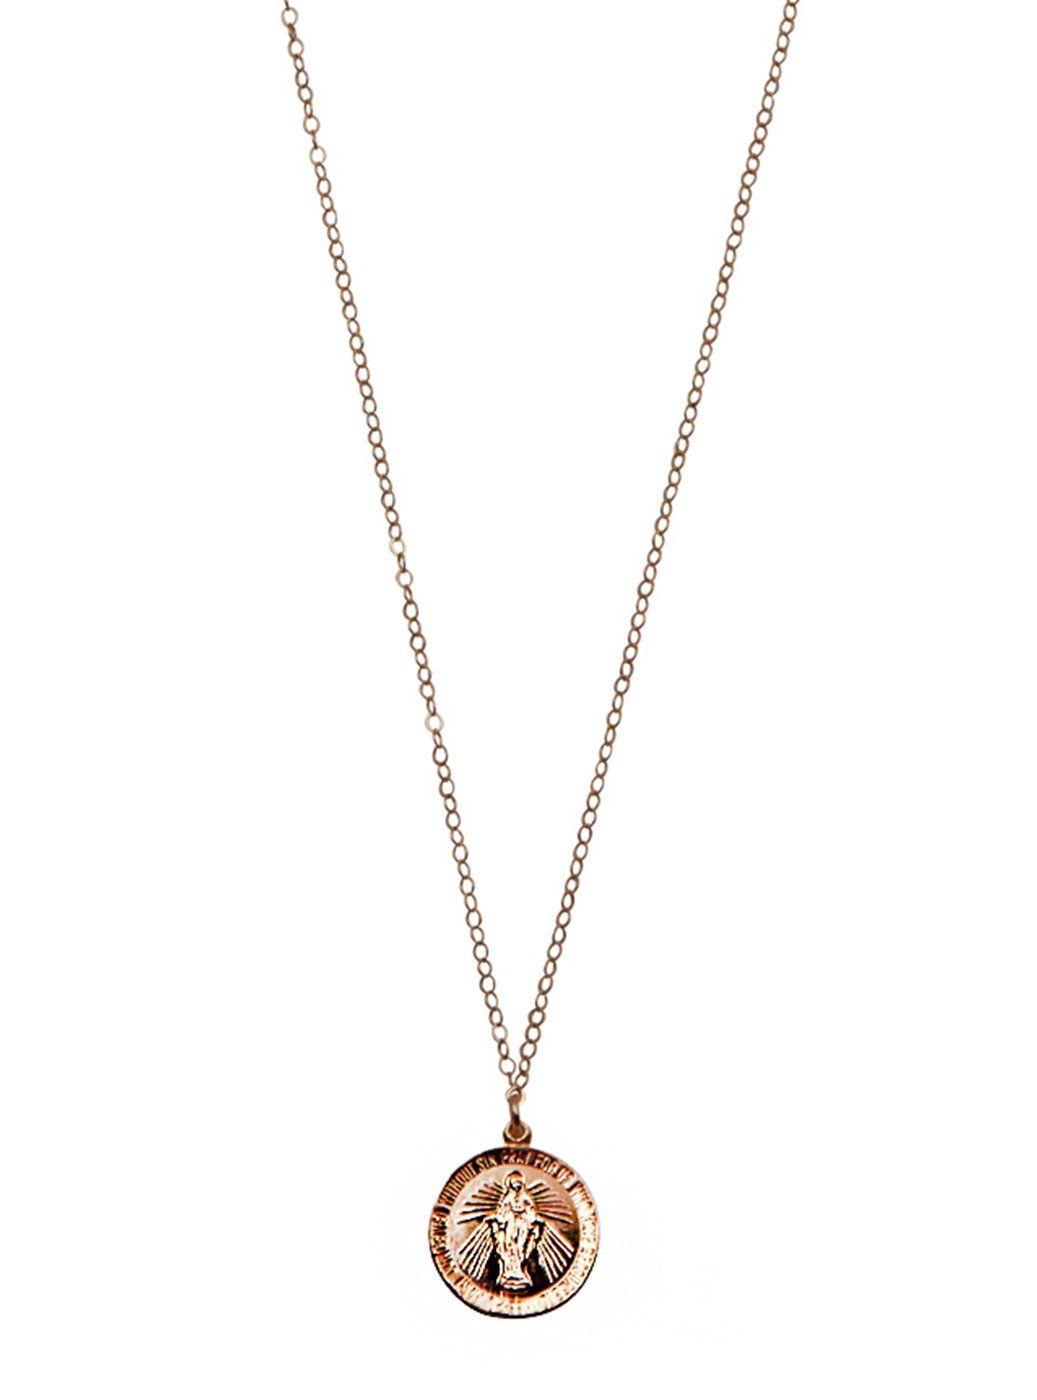 Round Gold Virgin Mary Pendant Necklace